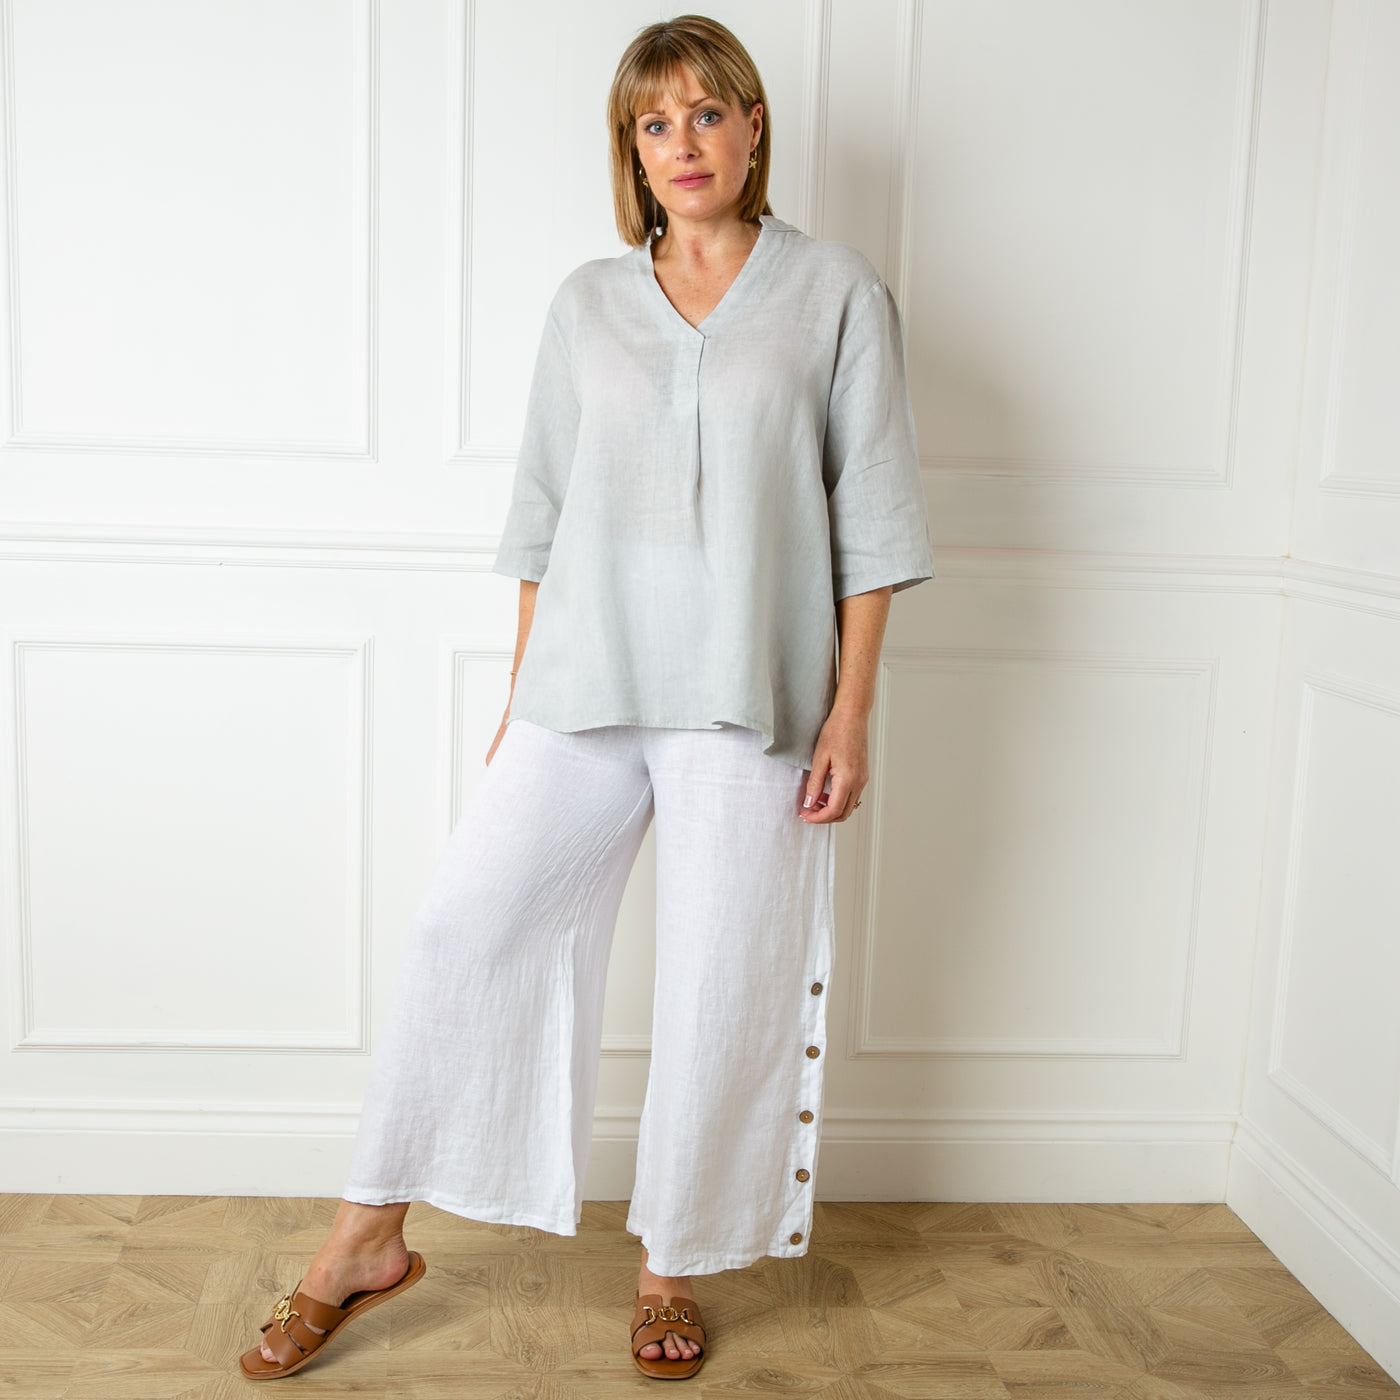 The Linen Tunic Top in dove grey made from 100% linen for a lightweight summer look